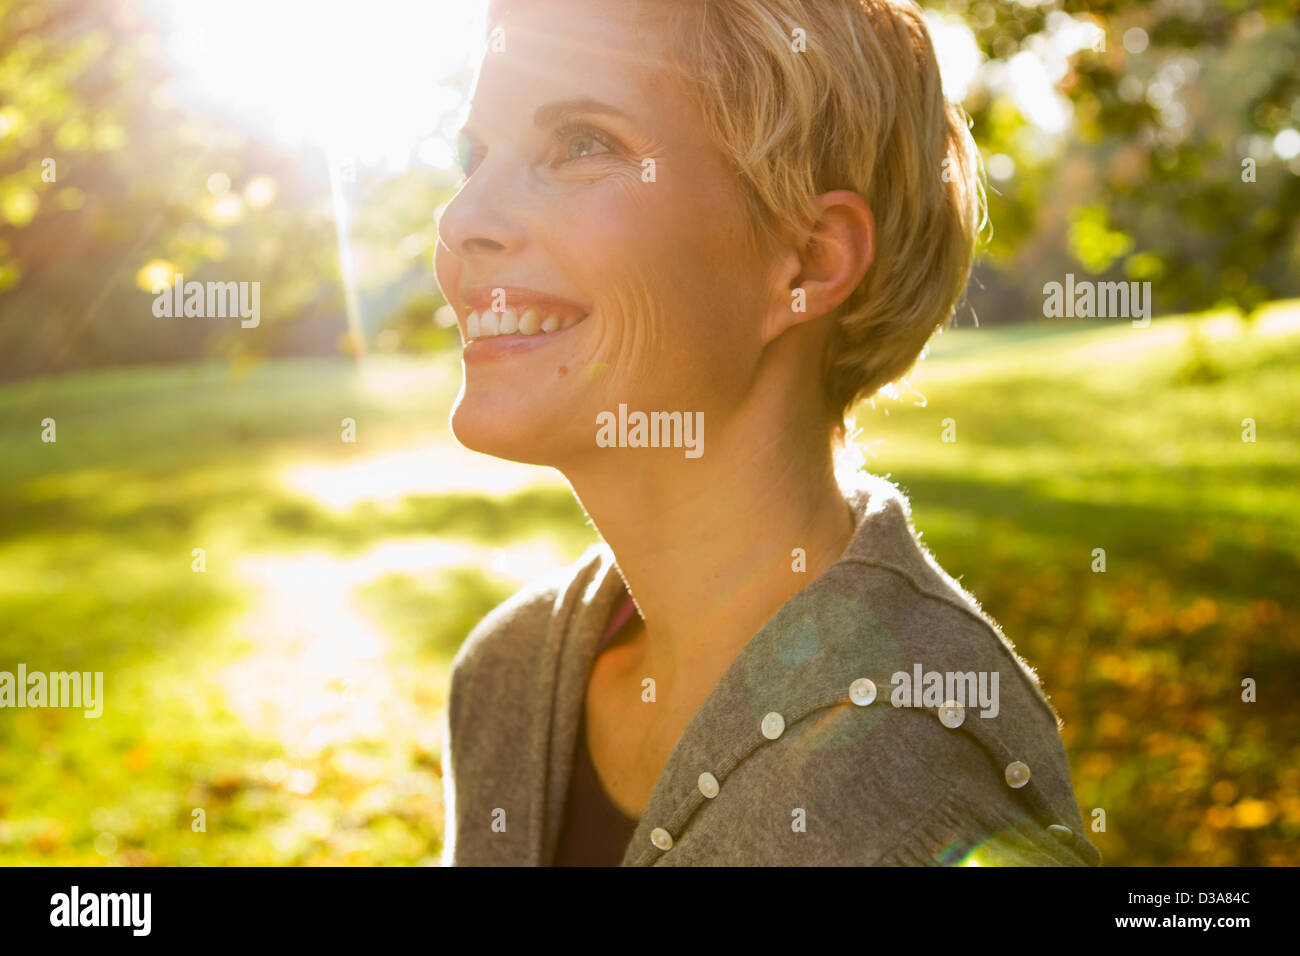 Woman smiling in park Banque D'Images